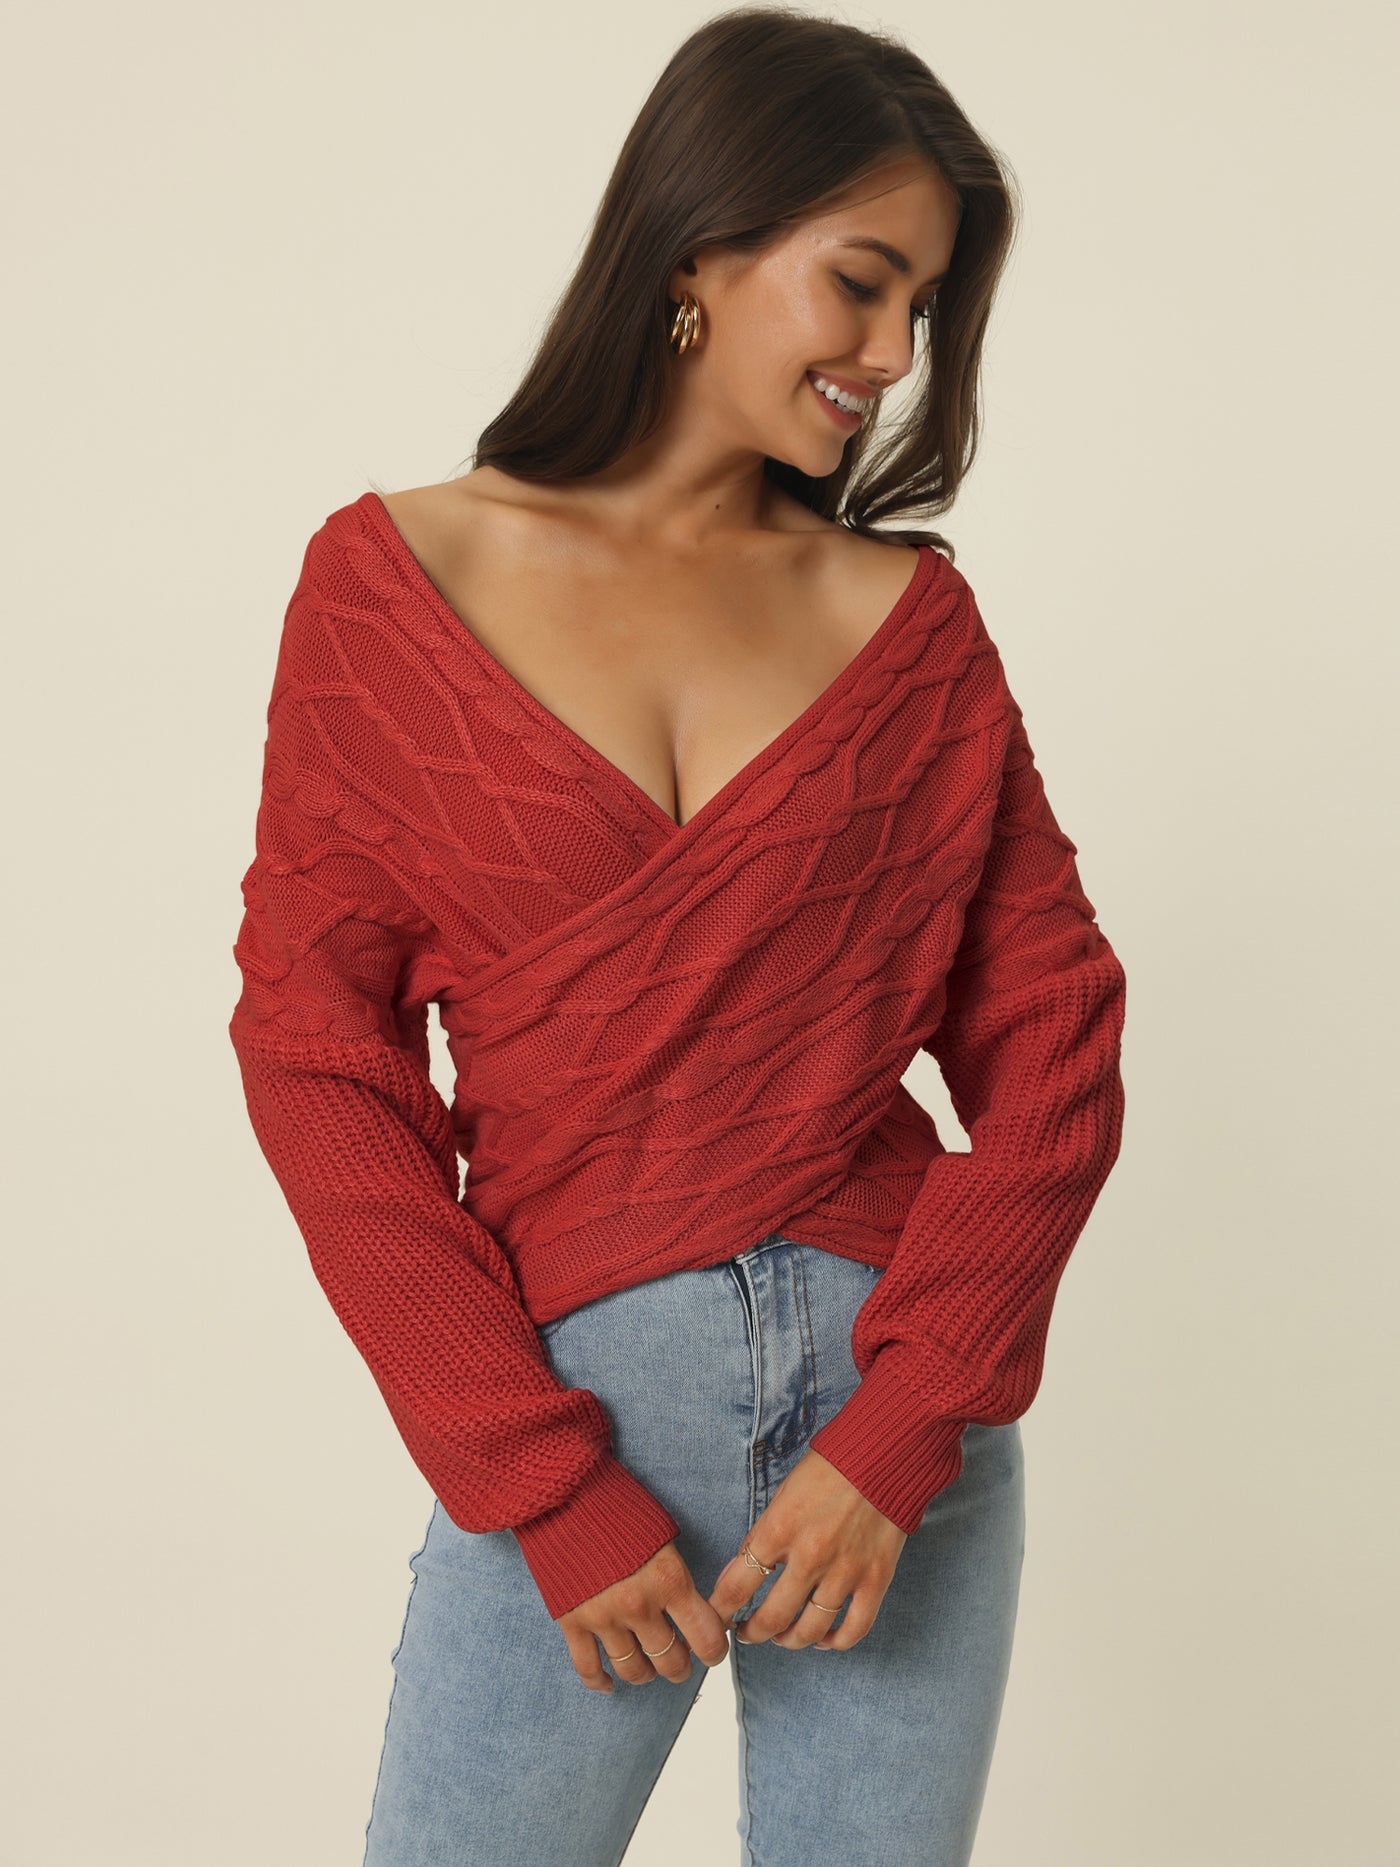 Bublédon Women's 2023 Fall Winter Casual Long Sleeve V Neck Cross Wrap Front Off Shoulder Asymmetric Hem Cable Knitted Crop Pullover Sweater